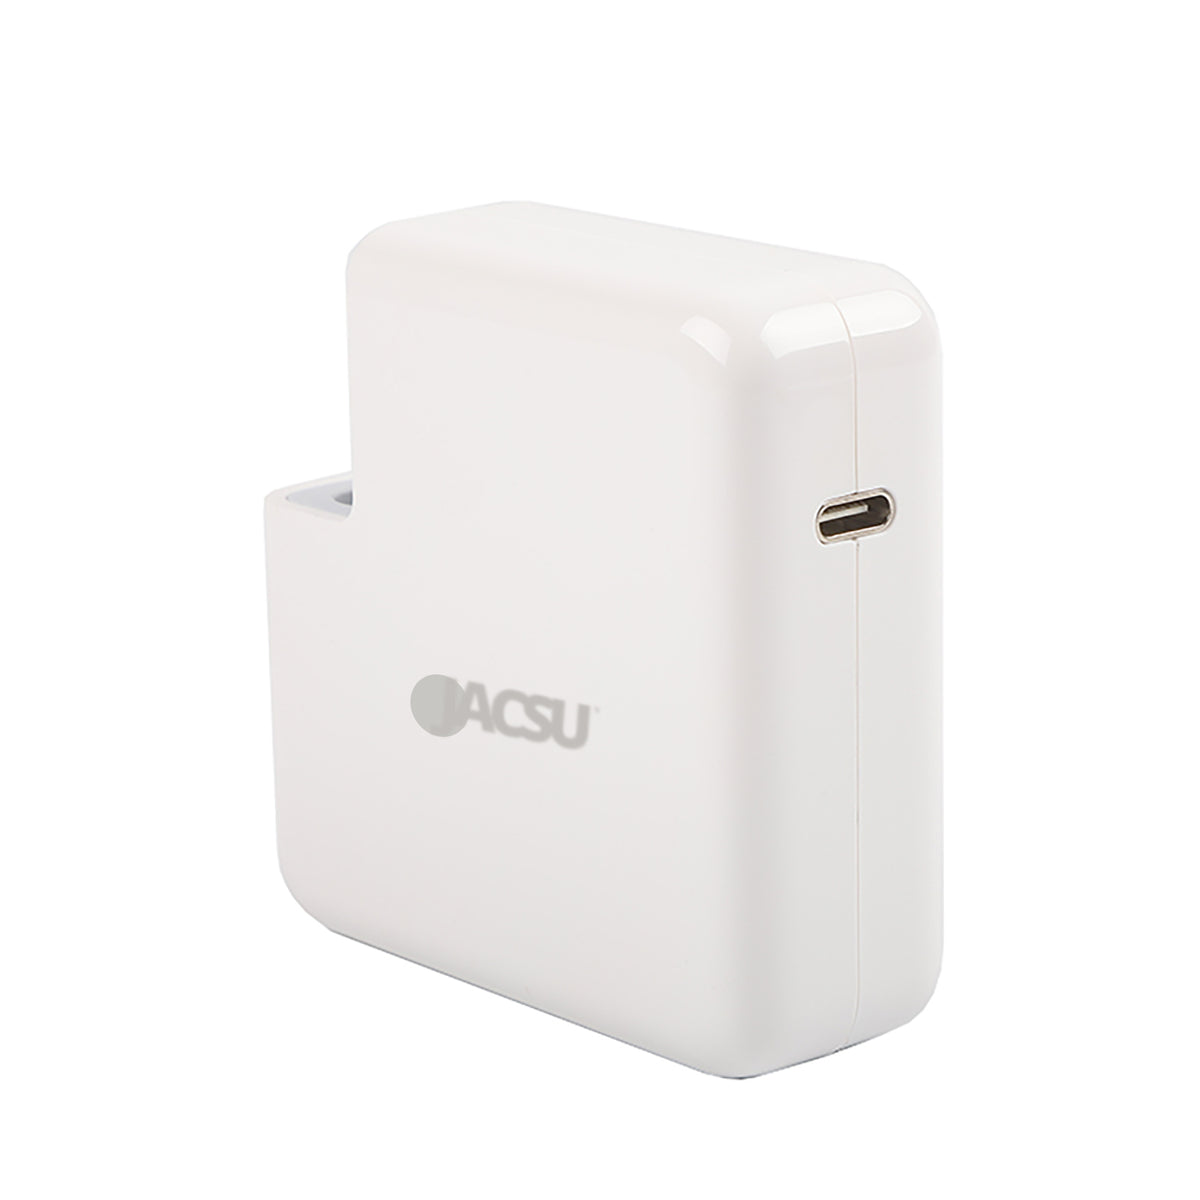 Jacsu 61W 20.3V-3A USB-C Laptop Power Adapter Type-C PD Charger For Latest MacBook PRO A2159, A2289, A2251